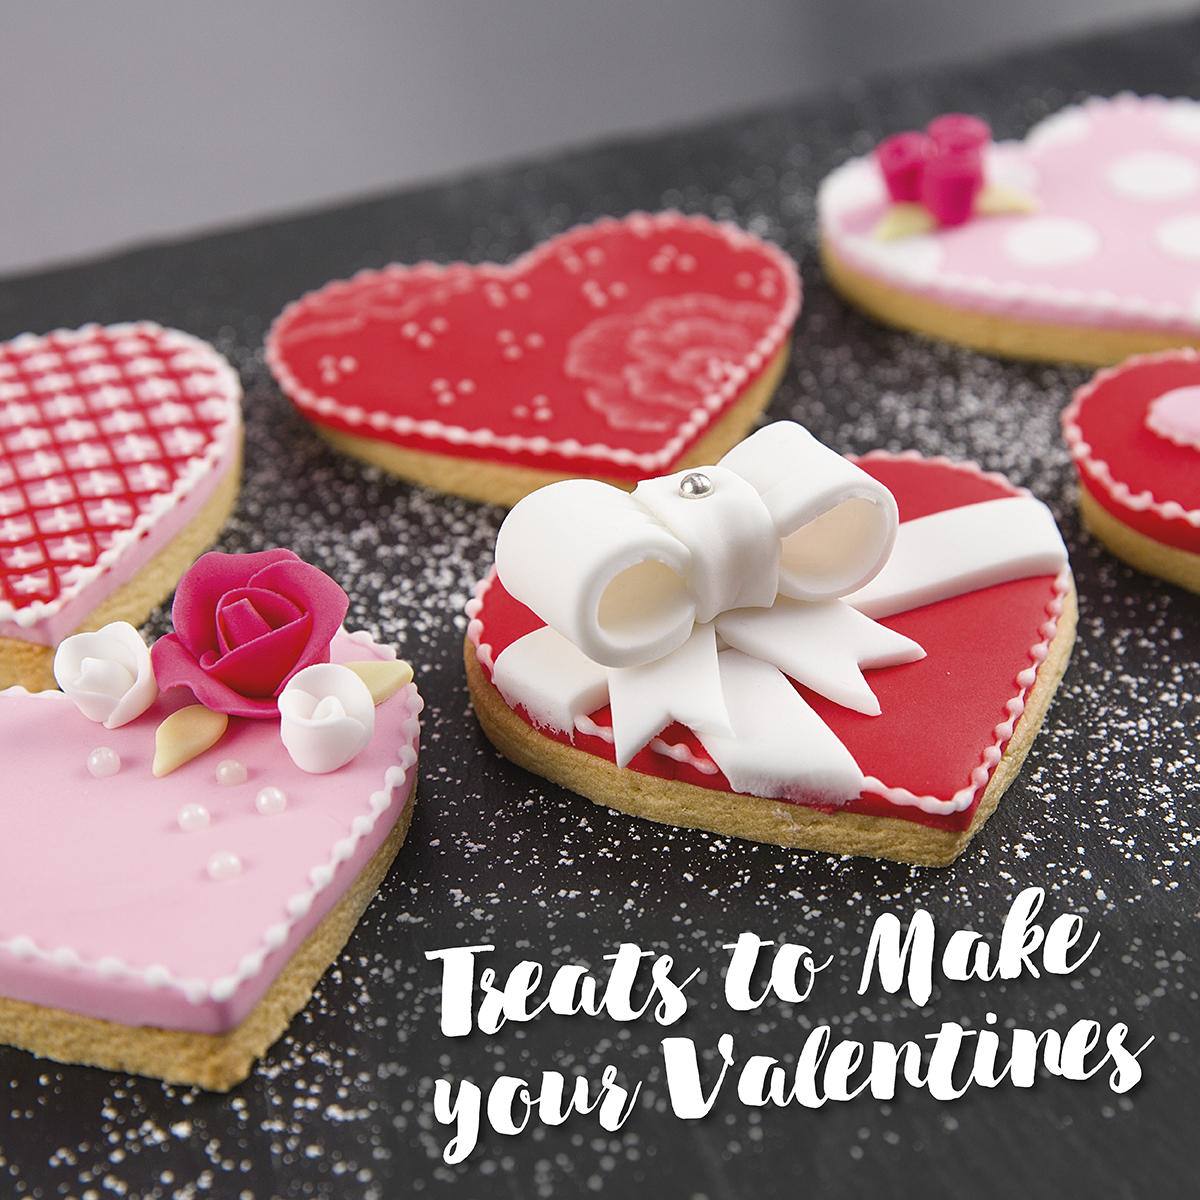 Treats to Make Your Valentines